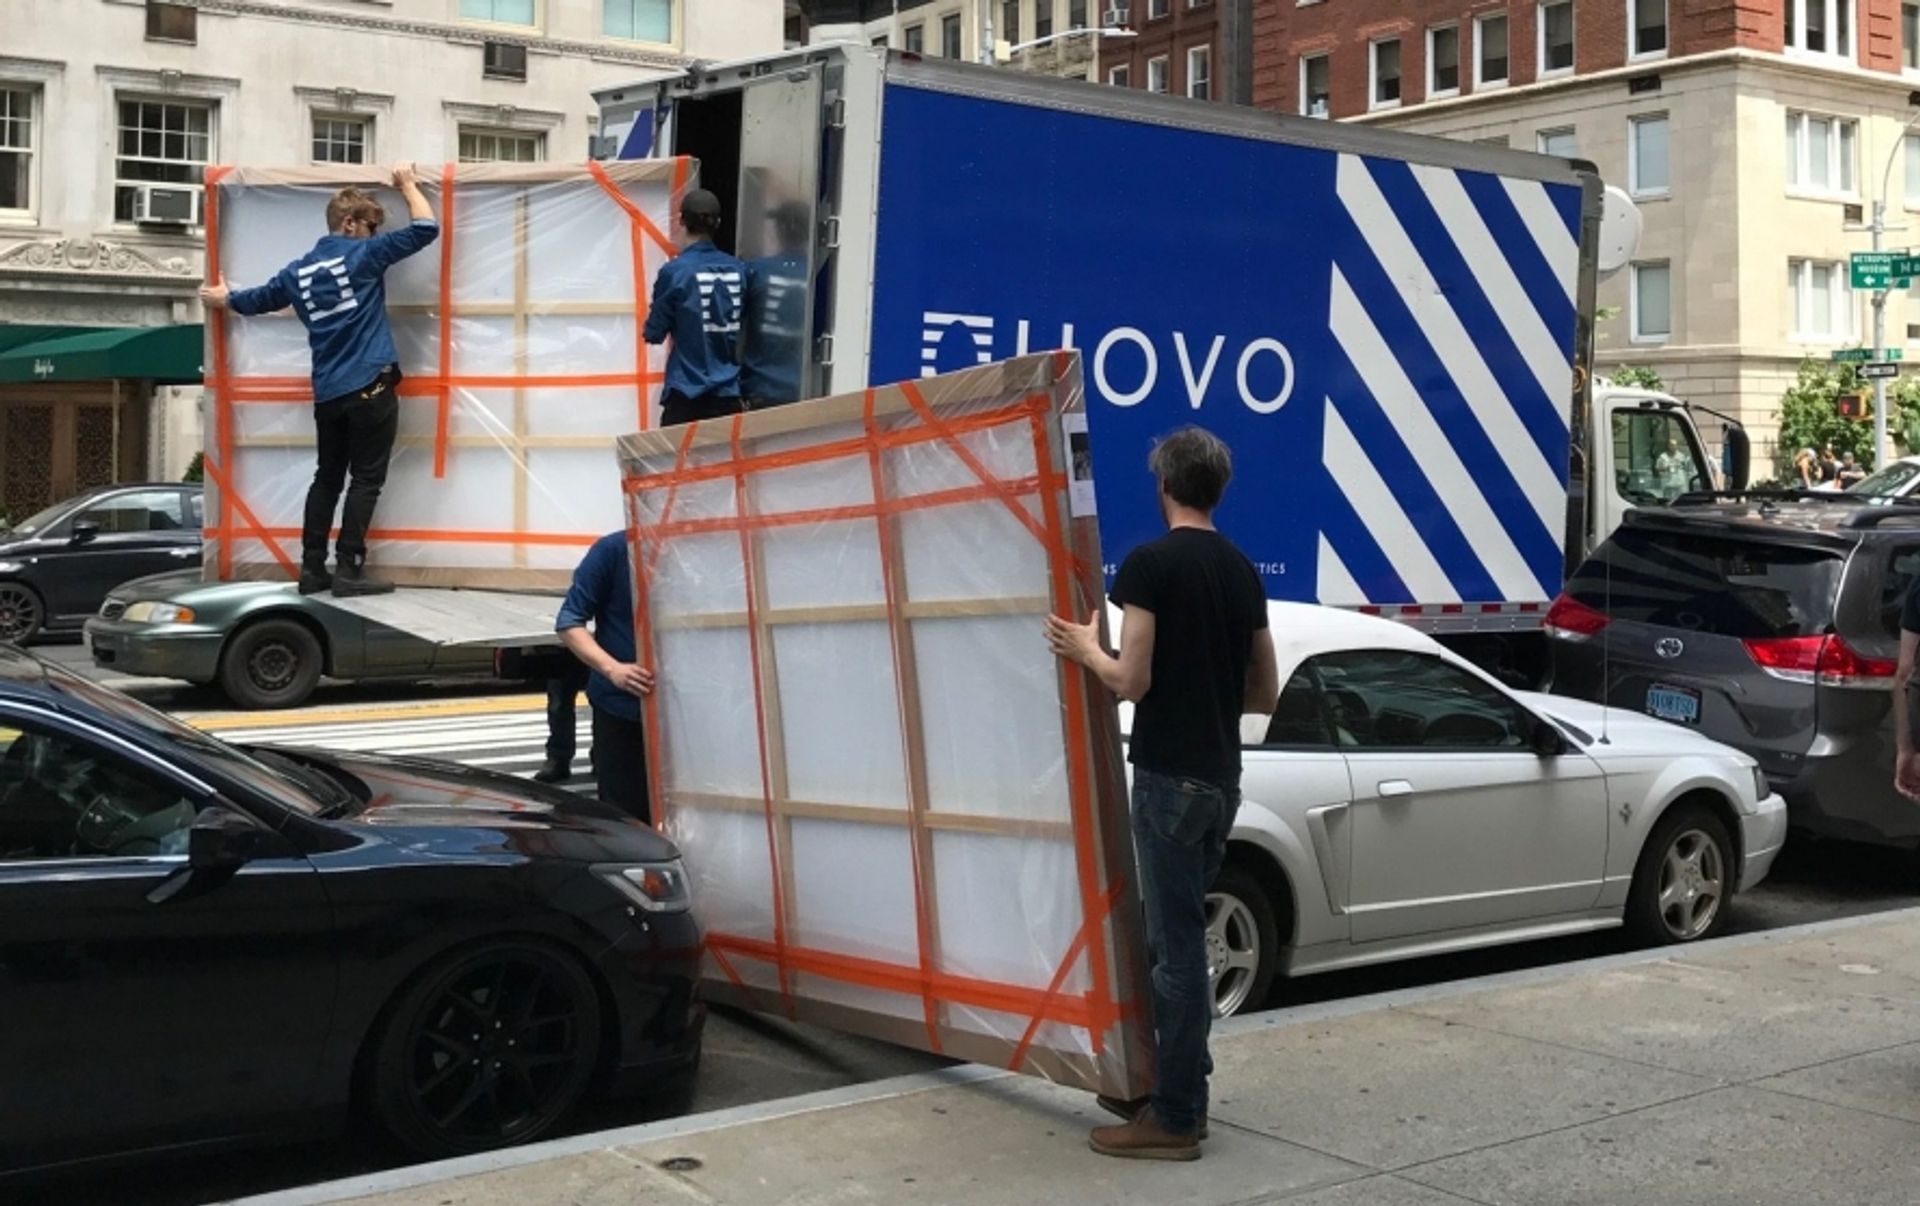 UOVO art handlers de-installing a gallery exhibition on Manhattan's Upper East Side. Courtesy of UOVO